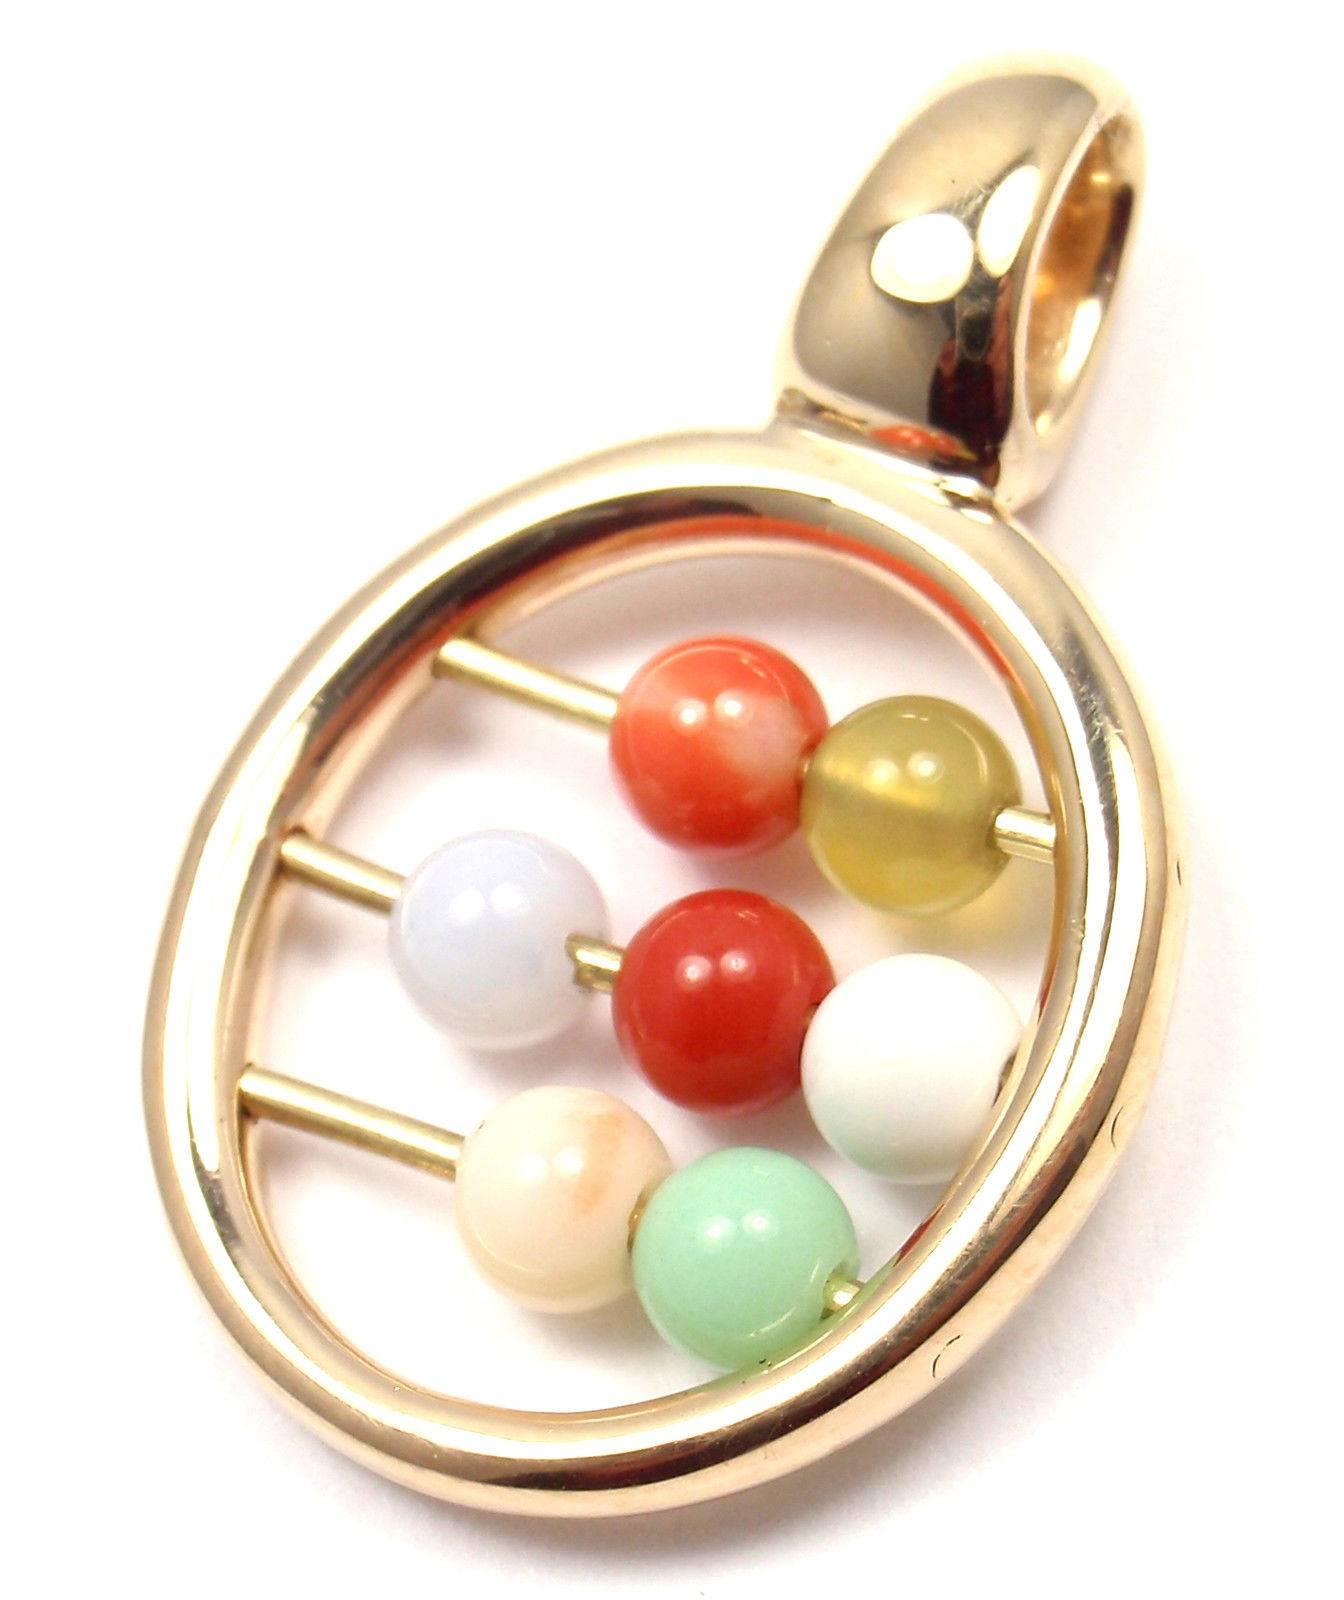 18k Yellow Gold Abacus Bead Pendant Charm by Hermes. 
With 2 Coral beads and Various color agate beads.

Details: 
Weight: 6 grams
Measurements: 29mm x 19mm
Stamped Hallmarks: Hermes 750 25573
*Free Shipping within the United States*

YOUR PRICE: